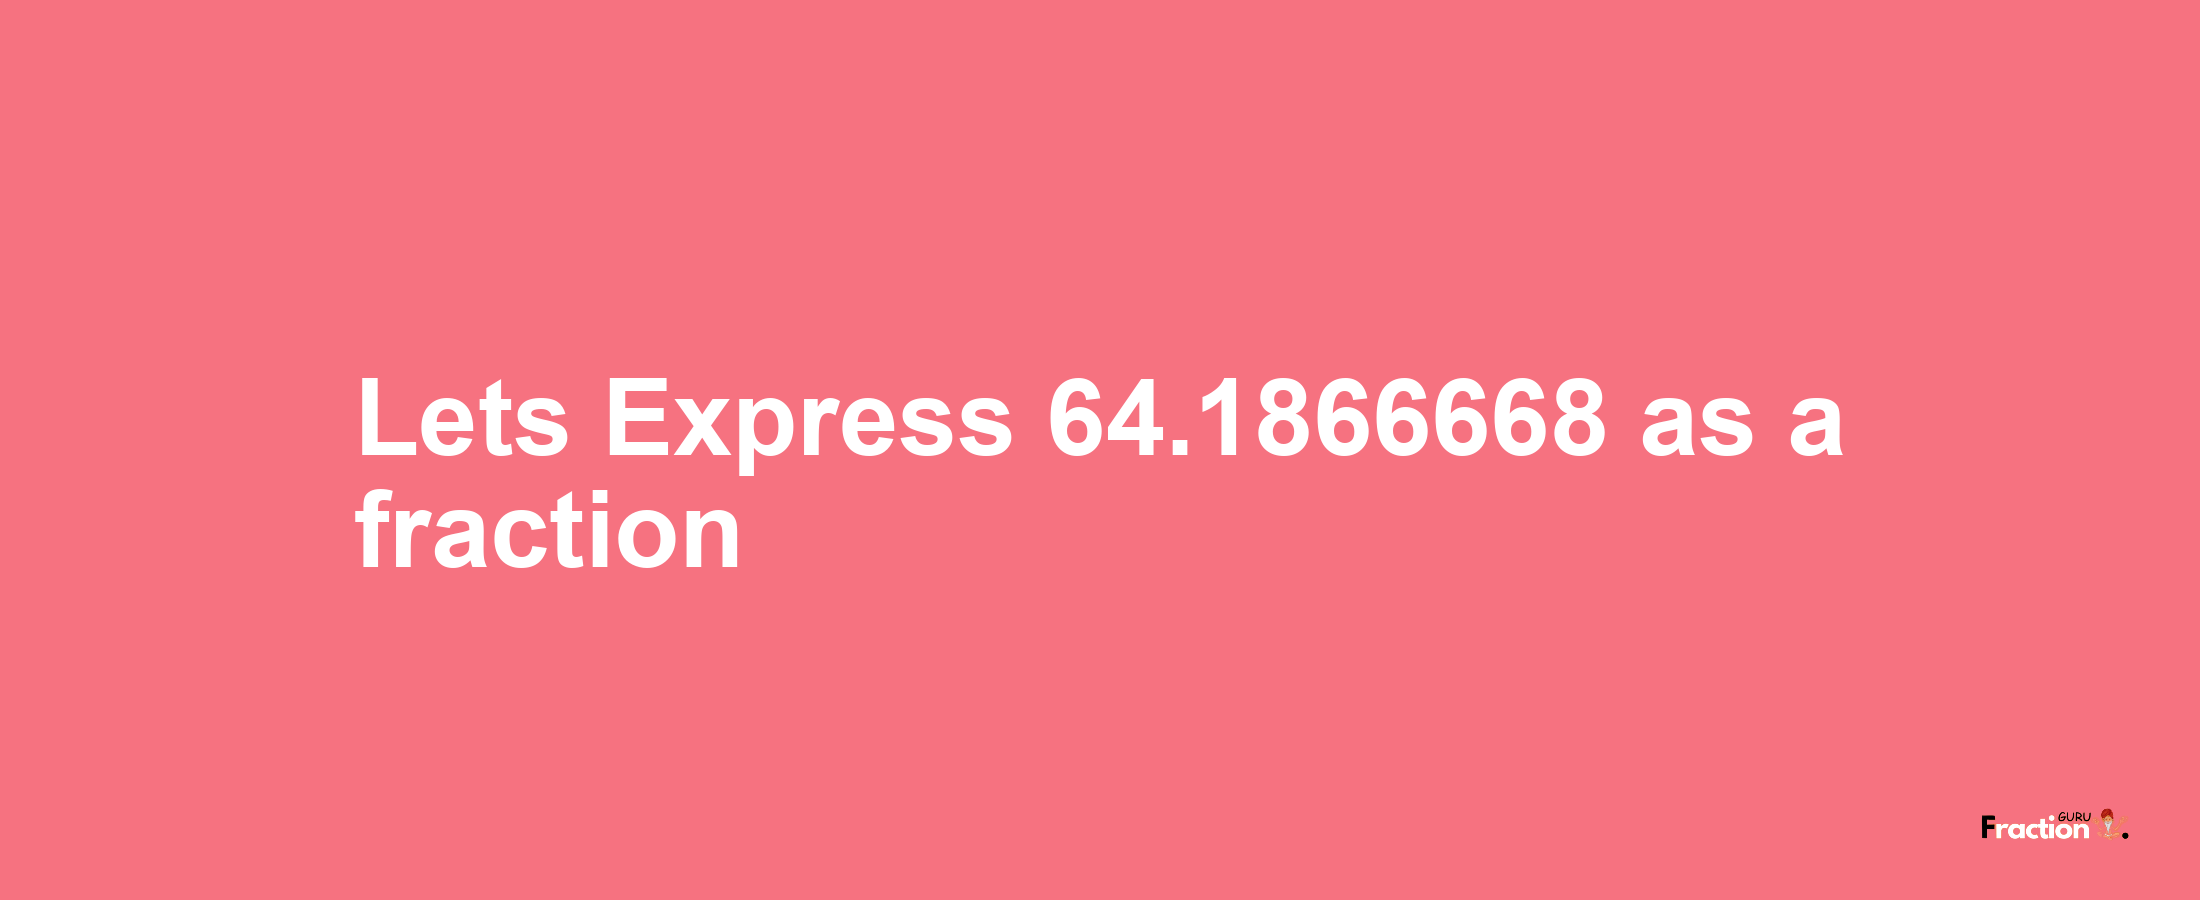 Lets Express 64.1866668 as afraction